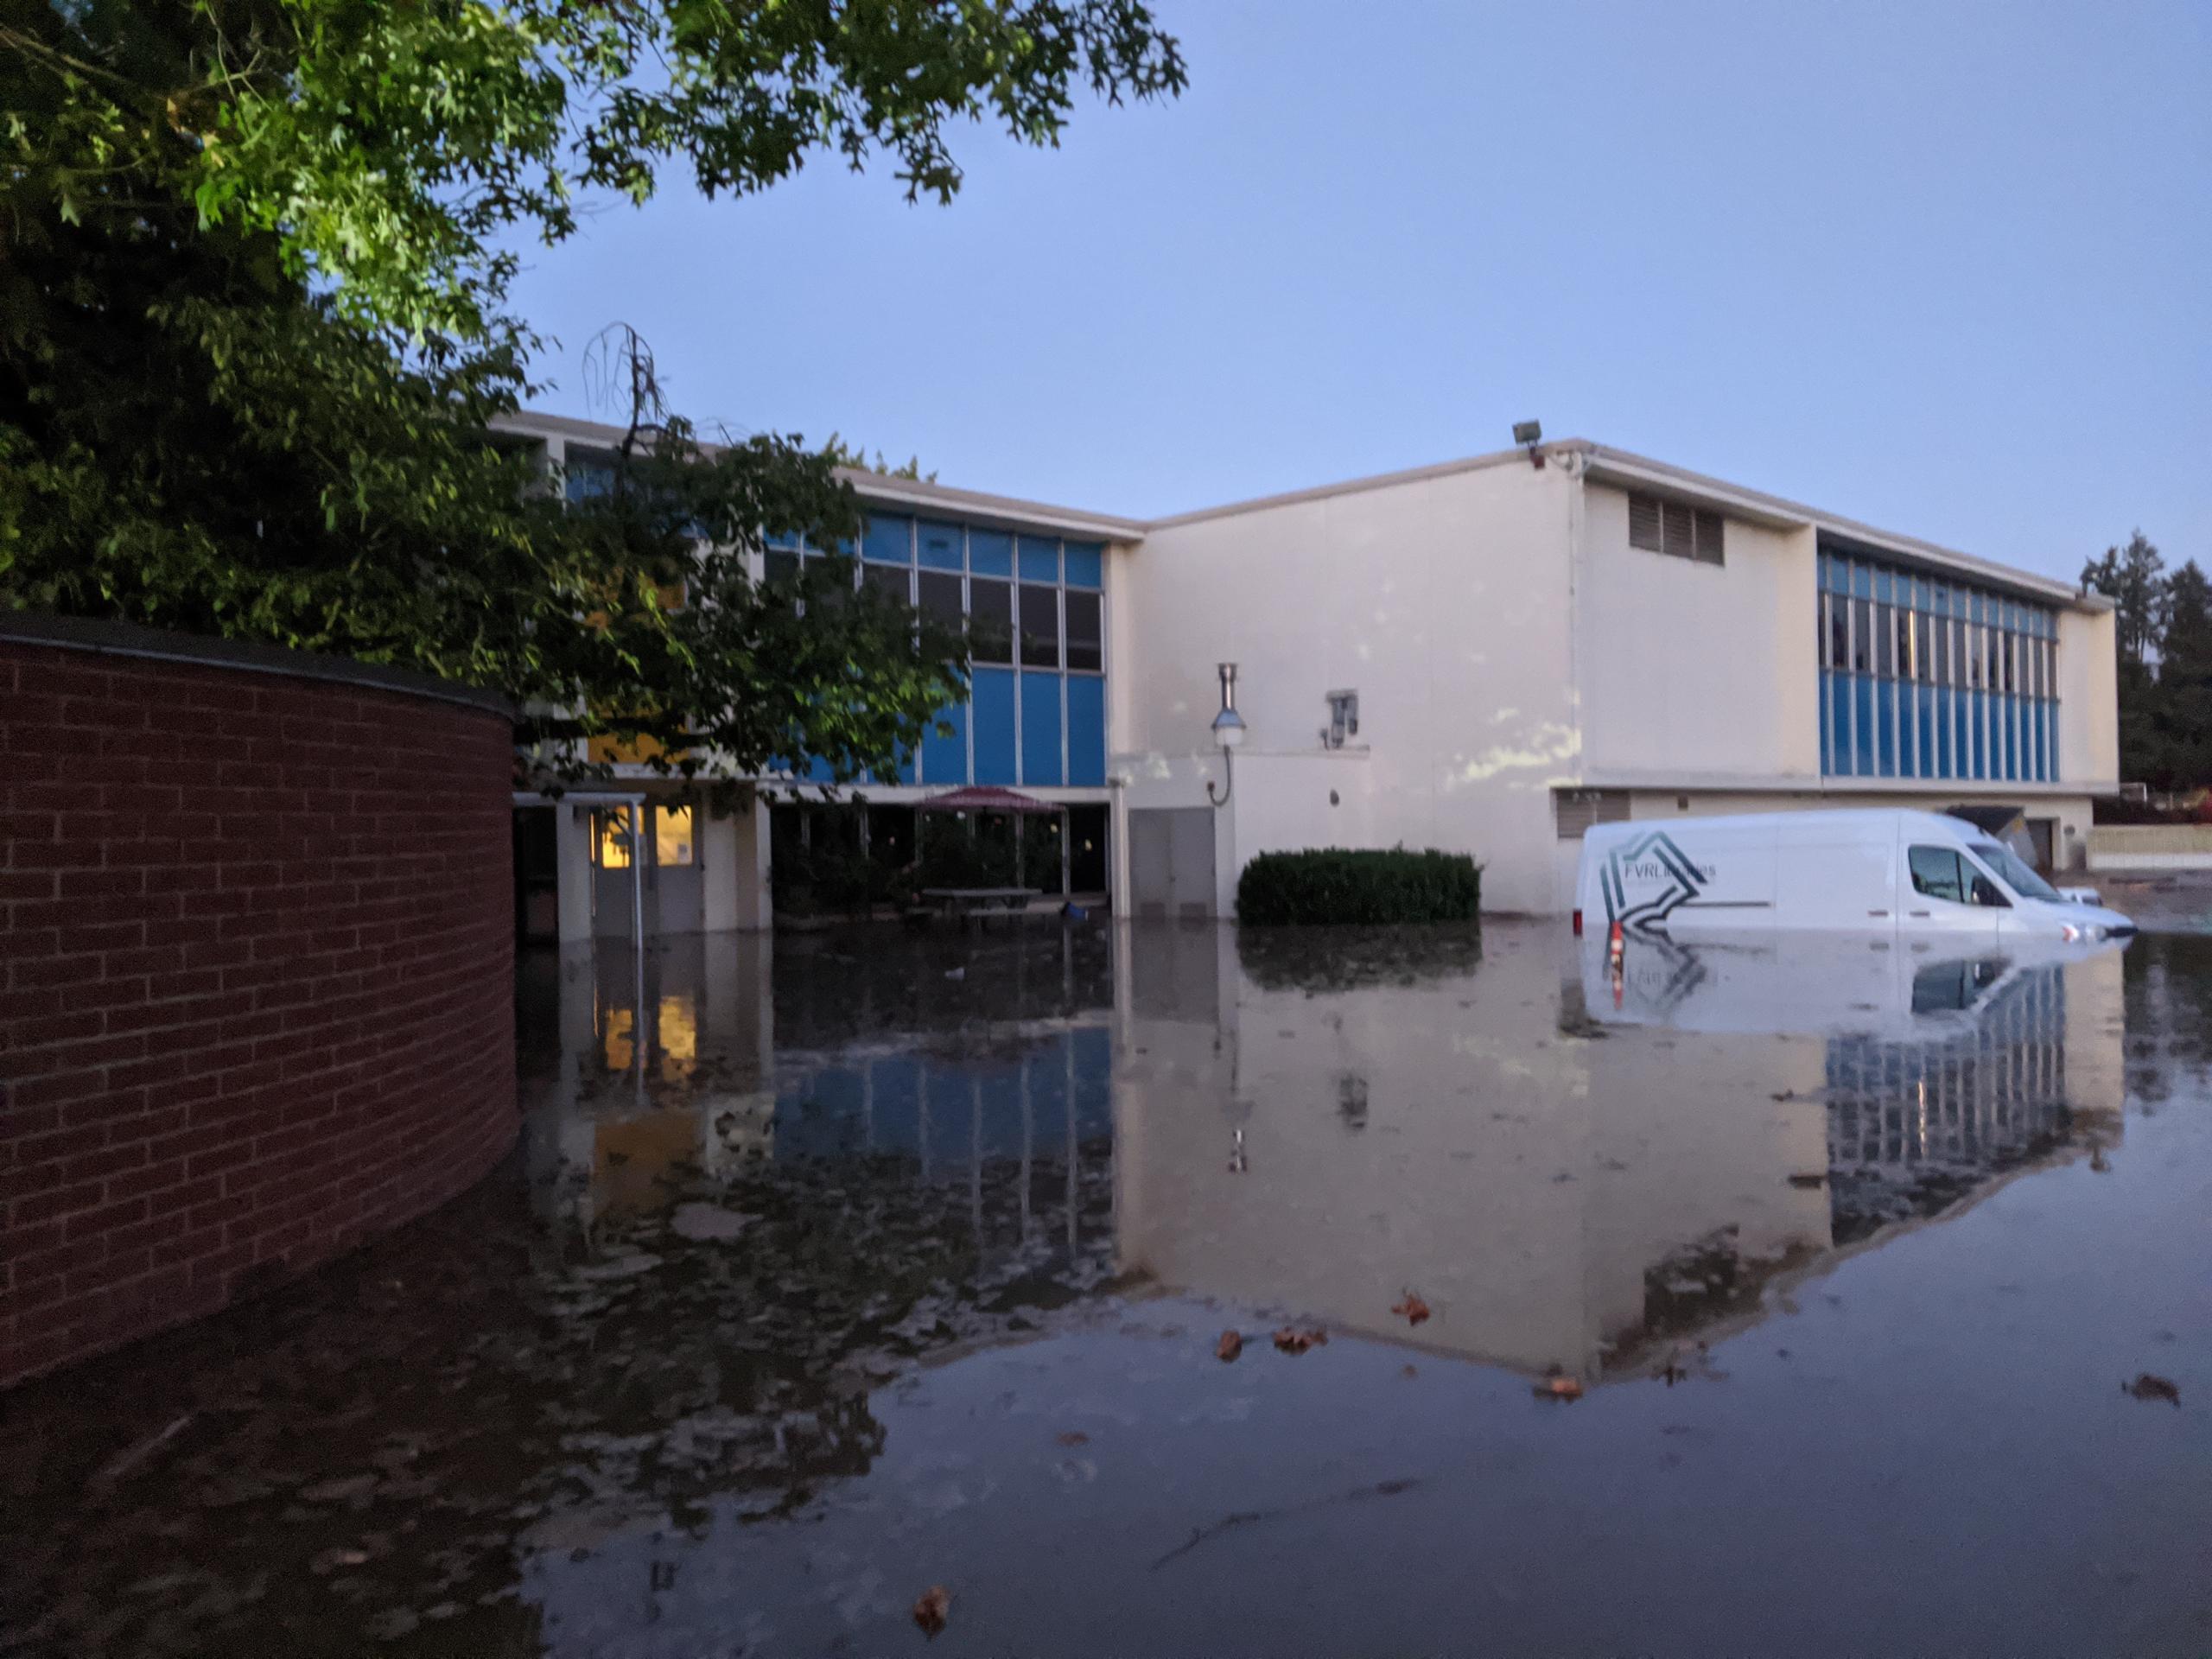 The Fort Vancouver Regional Libraries Operations Center in Vancouver was flooded after a water main broke on Saturday evening.